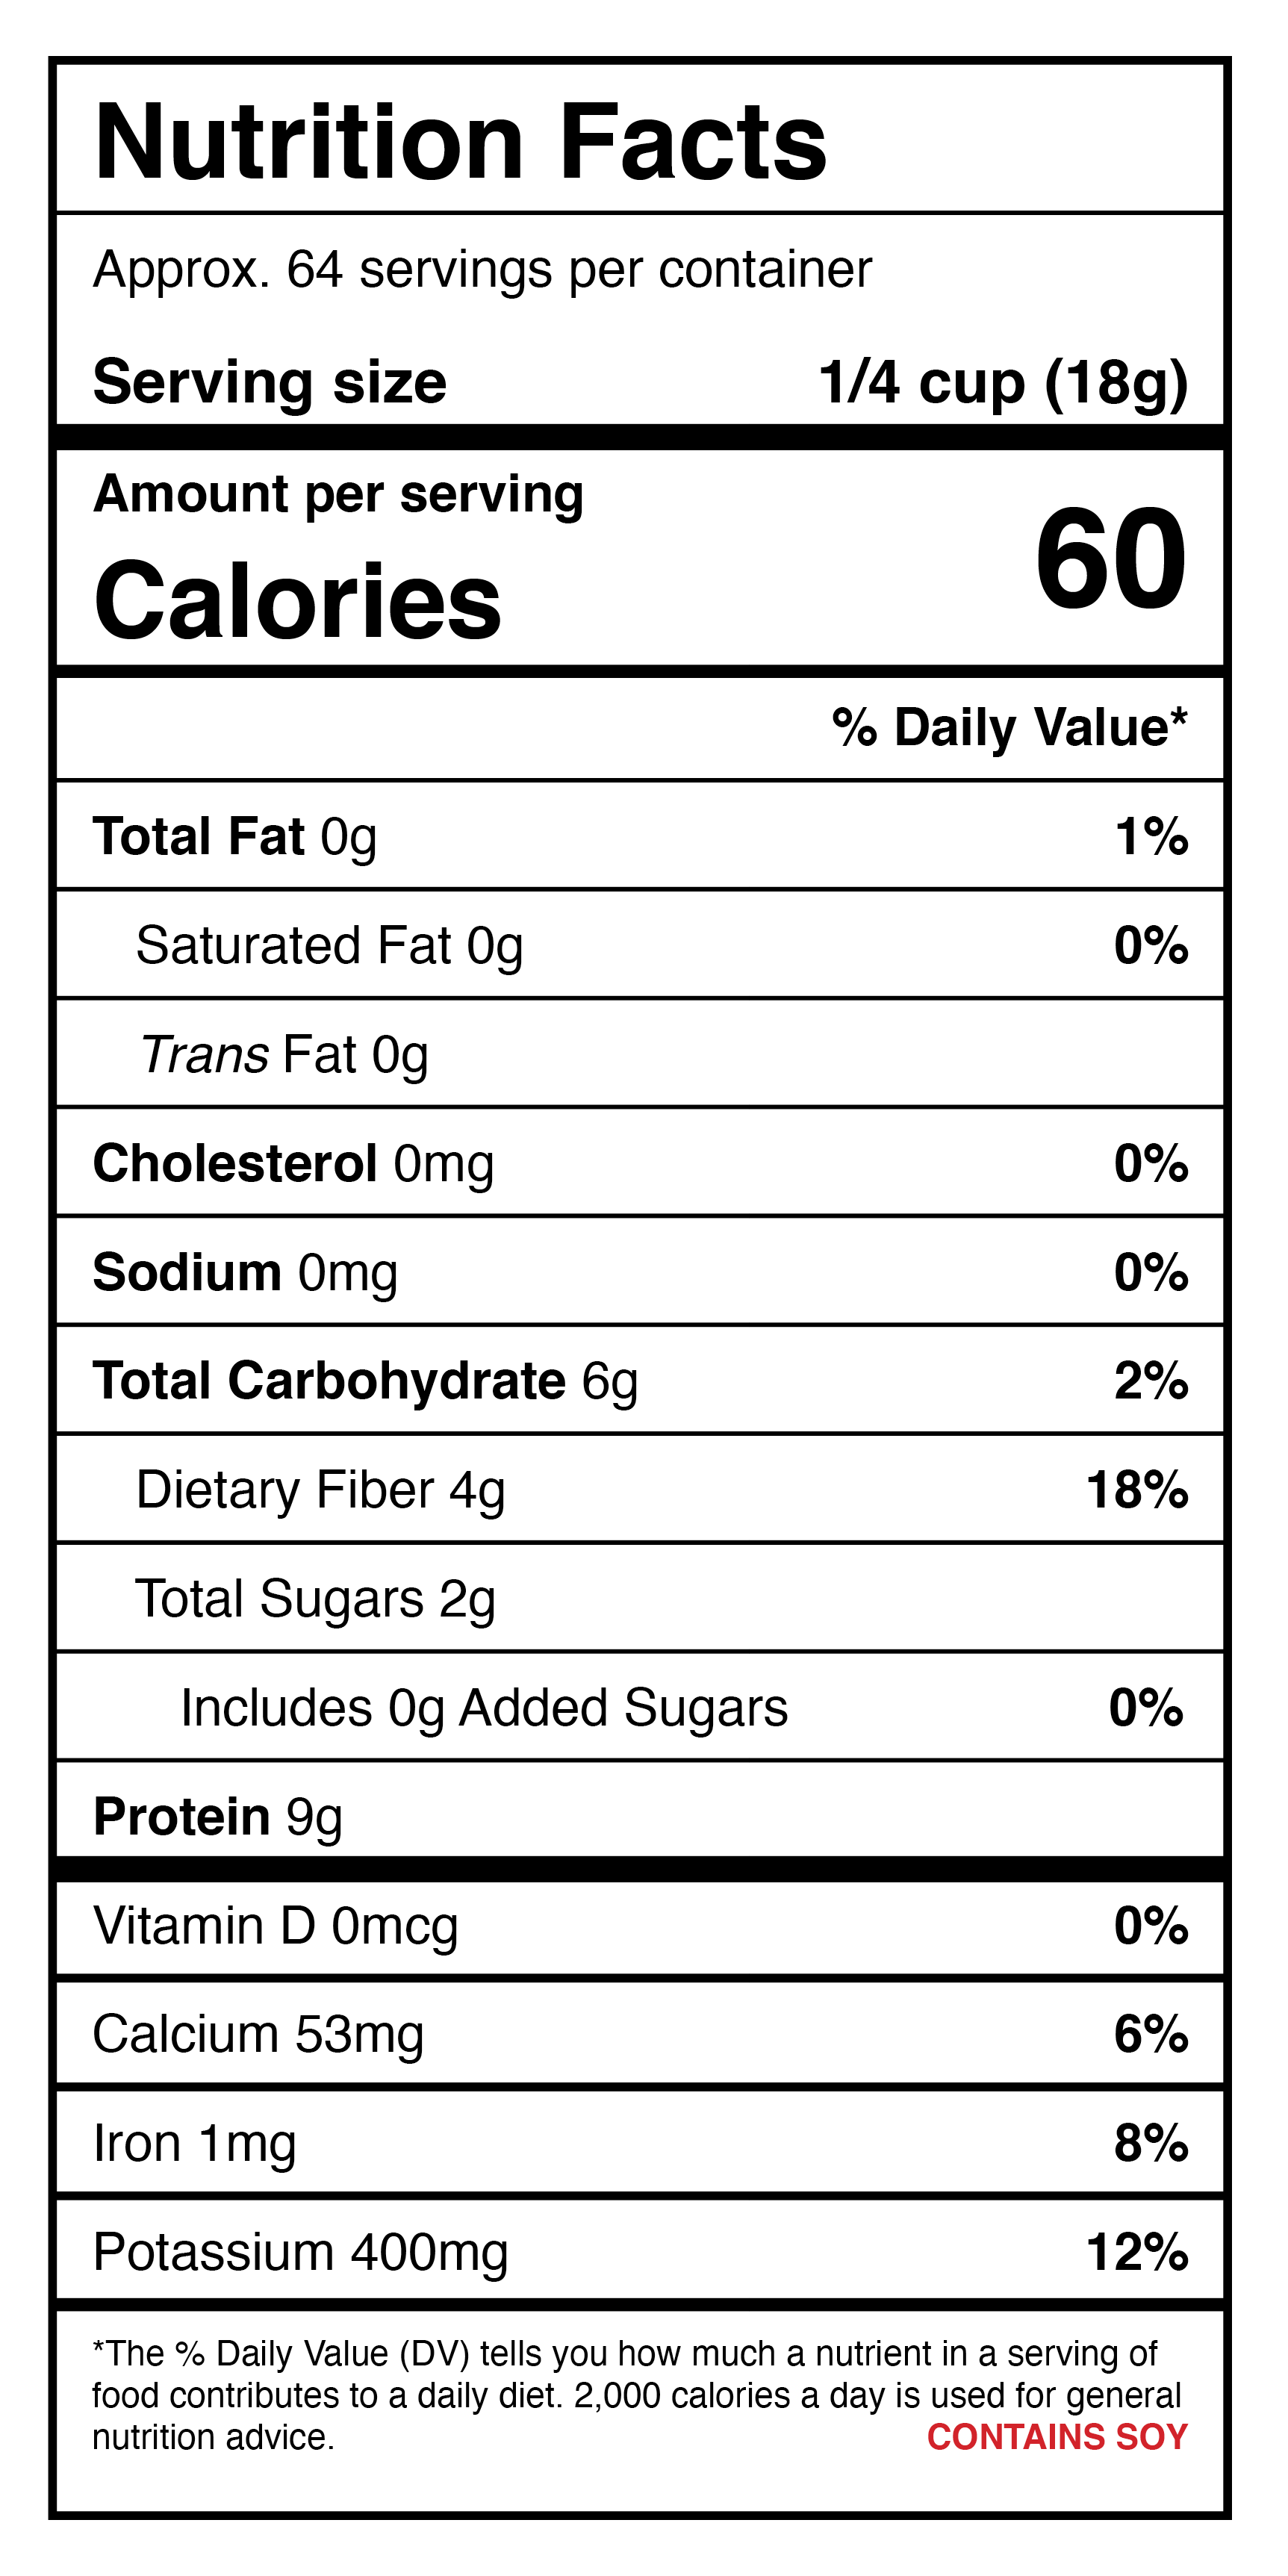 A nutrition label for Harmony House Textured Soy Protein (Unflavored) protein shake.